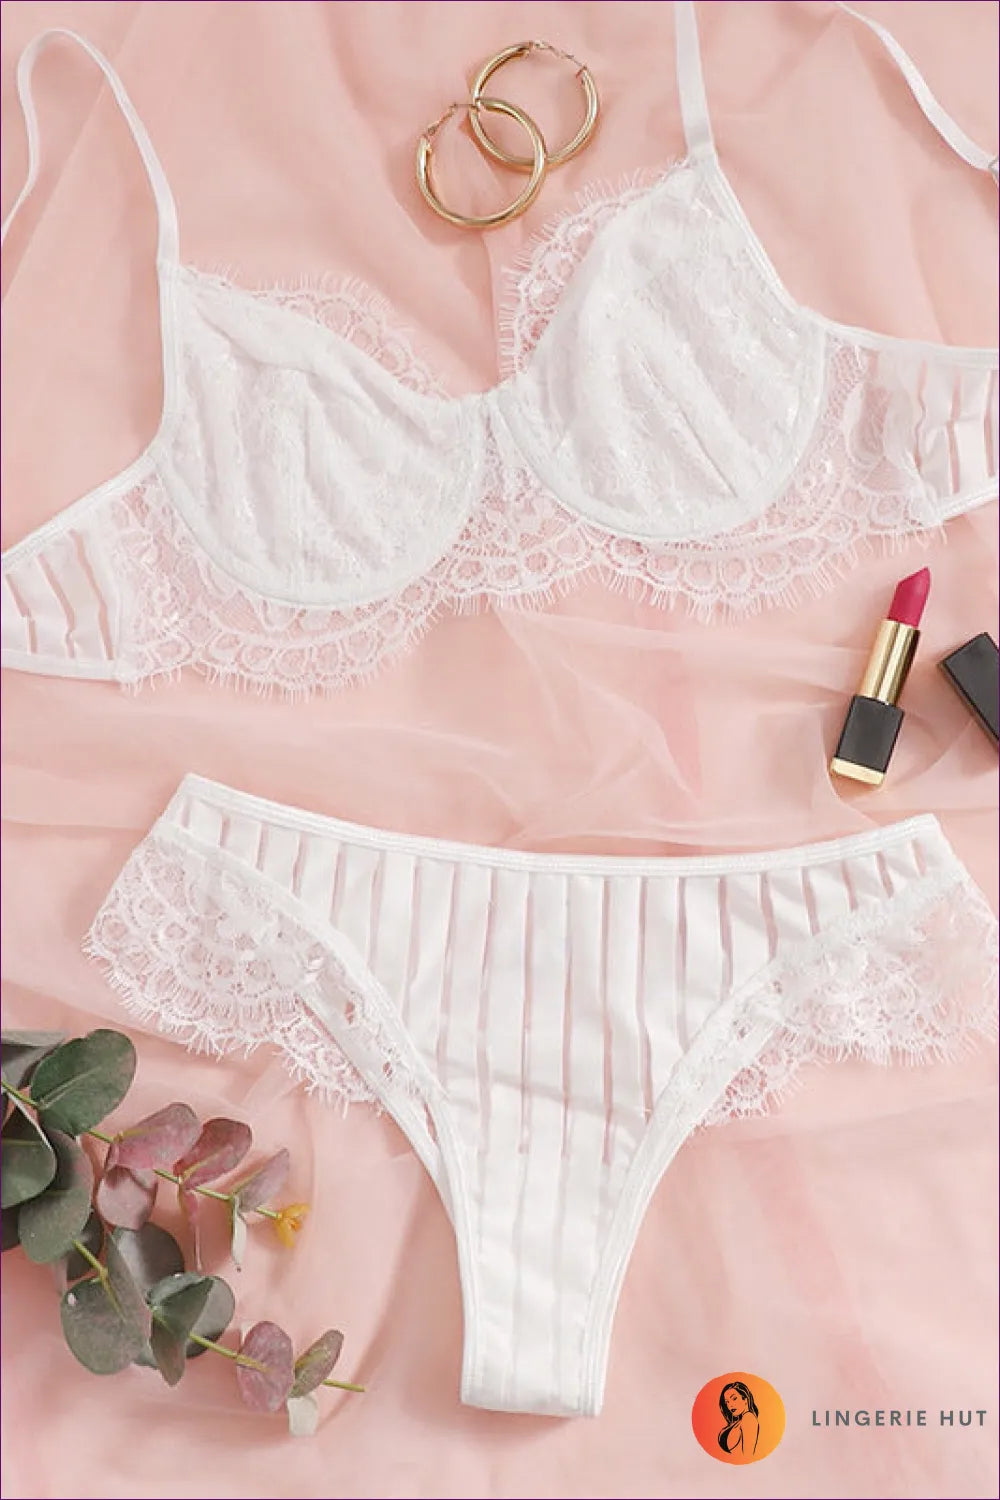 Turn Up The Heat This Summer With Our Lace-trim Bra Set. Infused Timeless Elegance, Sexy Ensemble Features